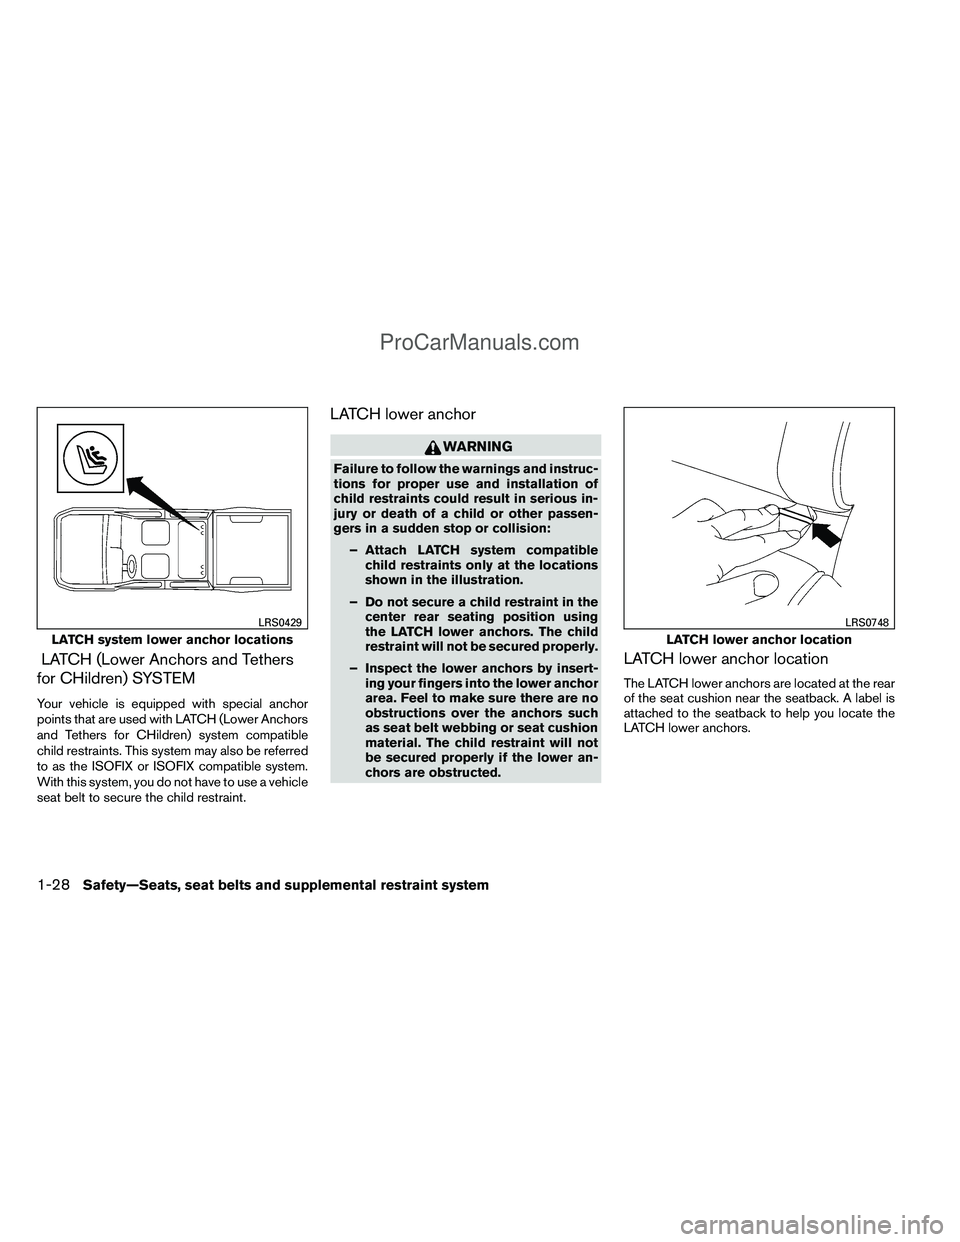 NISSAN TITAN 2012 Service Manual LATCH (Lower Anchors and Tethers
for CHildren) SYSTEM
Your vehicle is equipped with special anchor
points that are used with LATCH (Lower Anchors
and Tethers for CHildren) system compatible
child rest